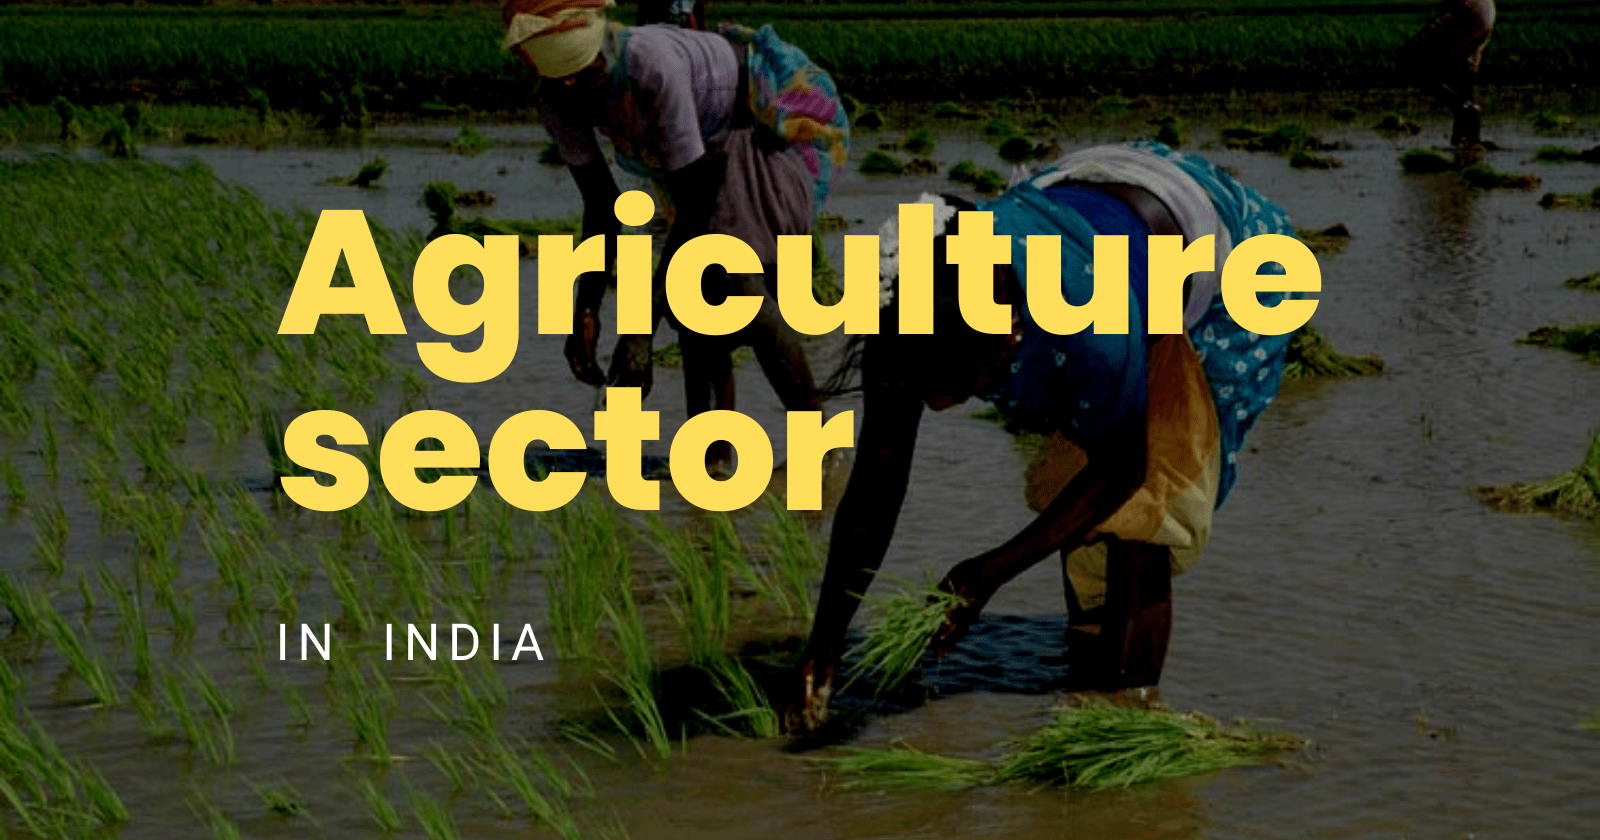 Agriculture sector In India